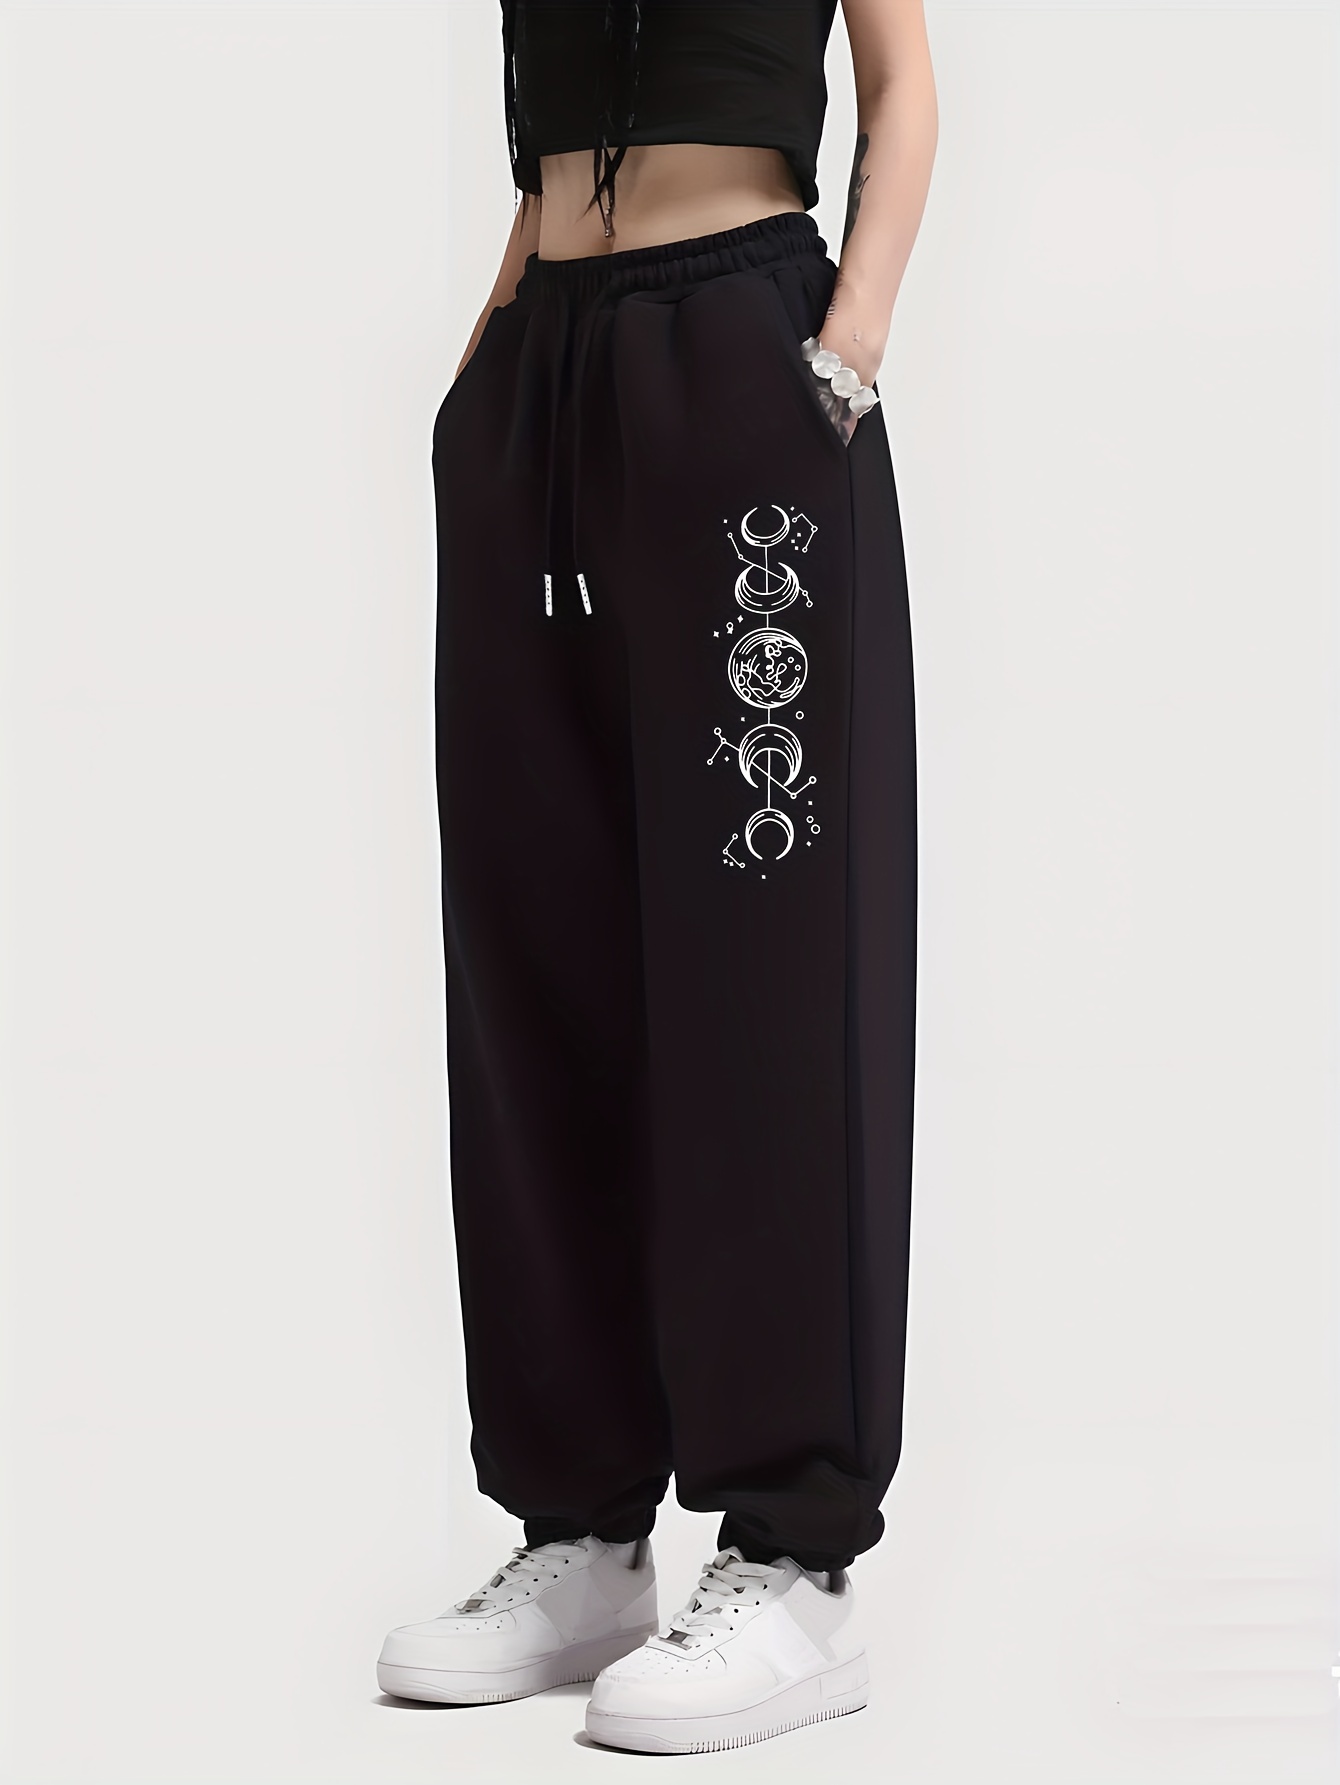 Women's Casual Sweatpants High Waisted Athletic Joggers Lounge